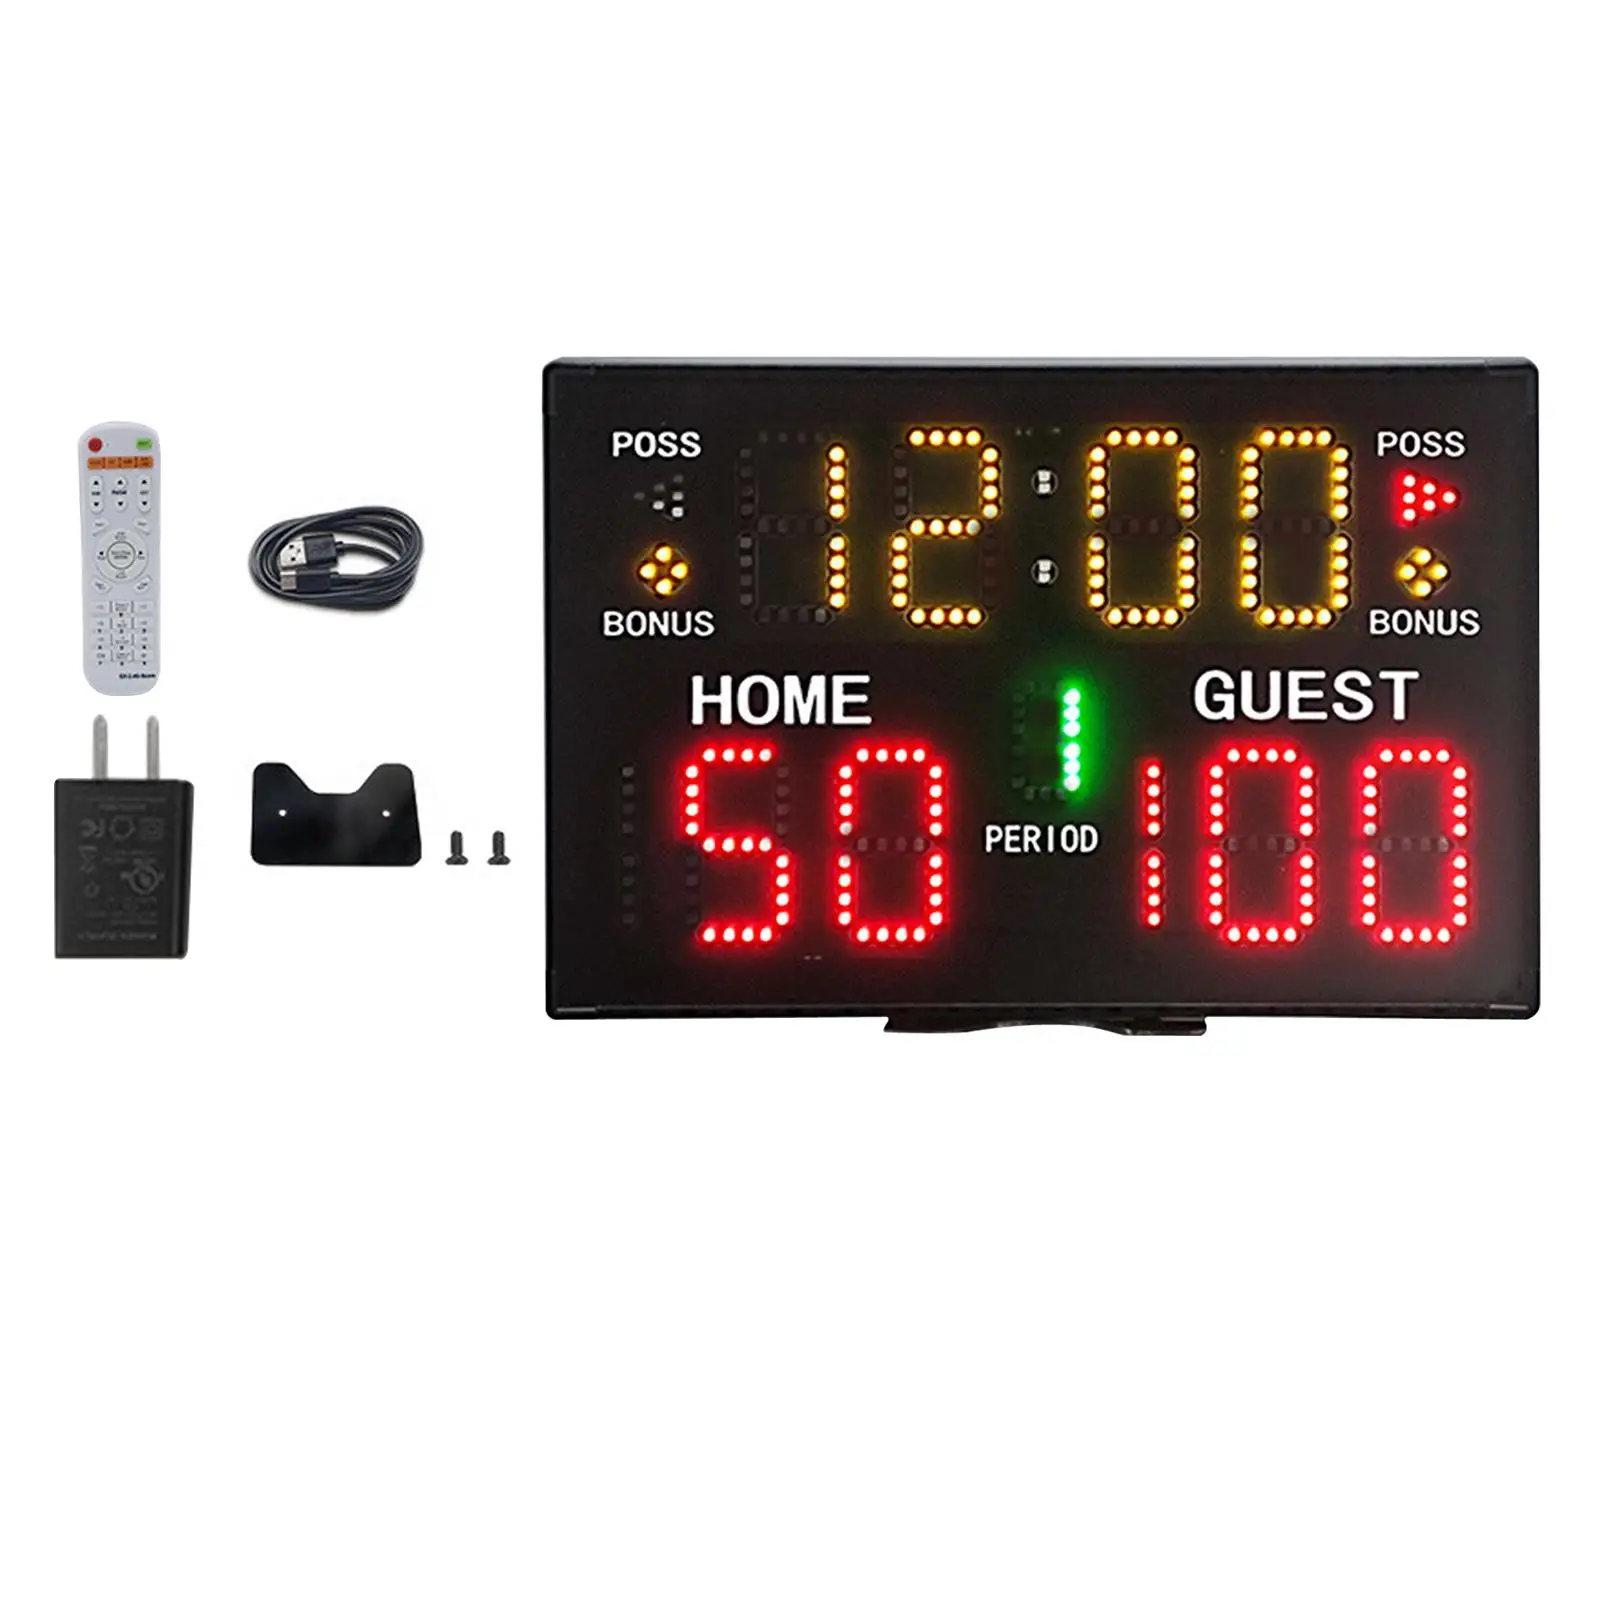 Digital Scoreboard Score Keeper Electronic Scoreboard with Accessories for Basketball Tennis Volleyball Boxing Judo Sports